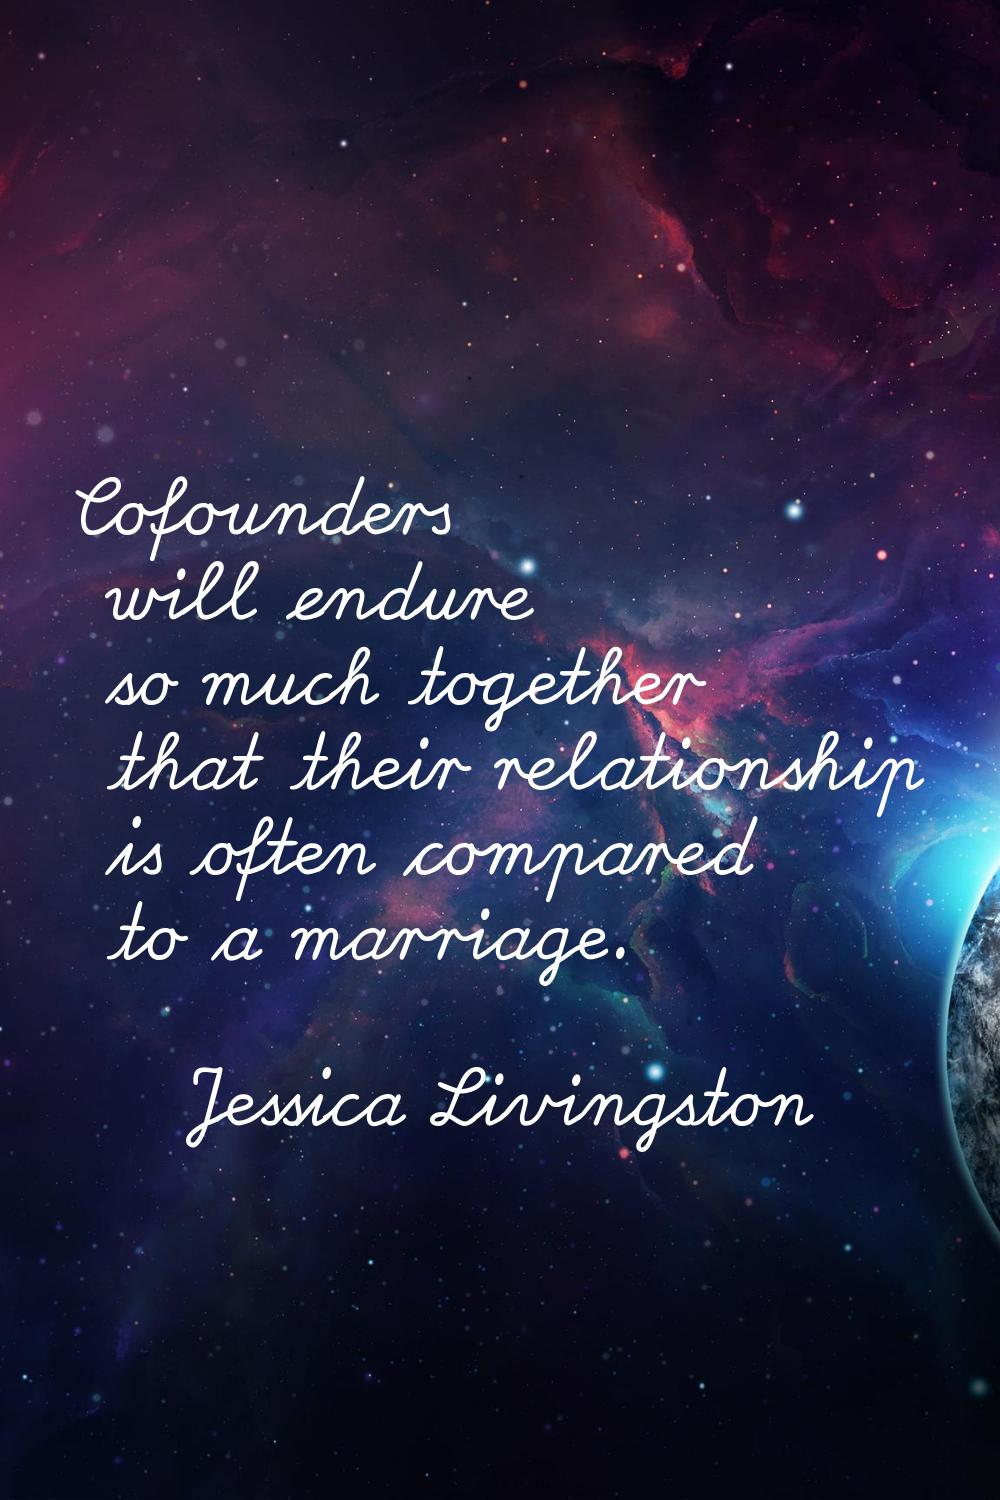 Cofounders will endure so much together that their relationship is often compared to a marriage.